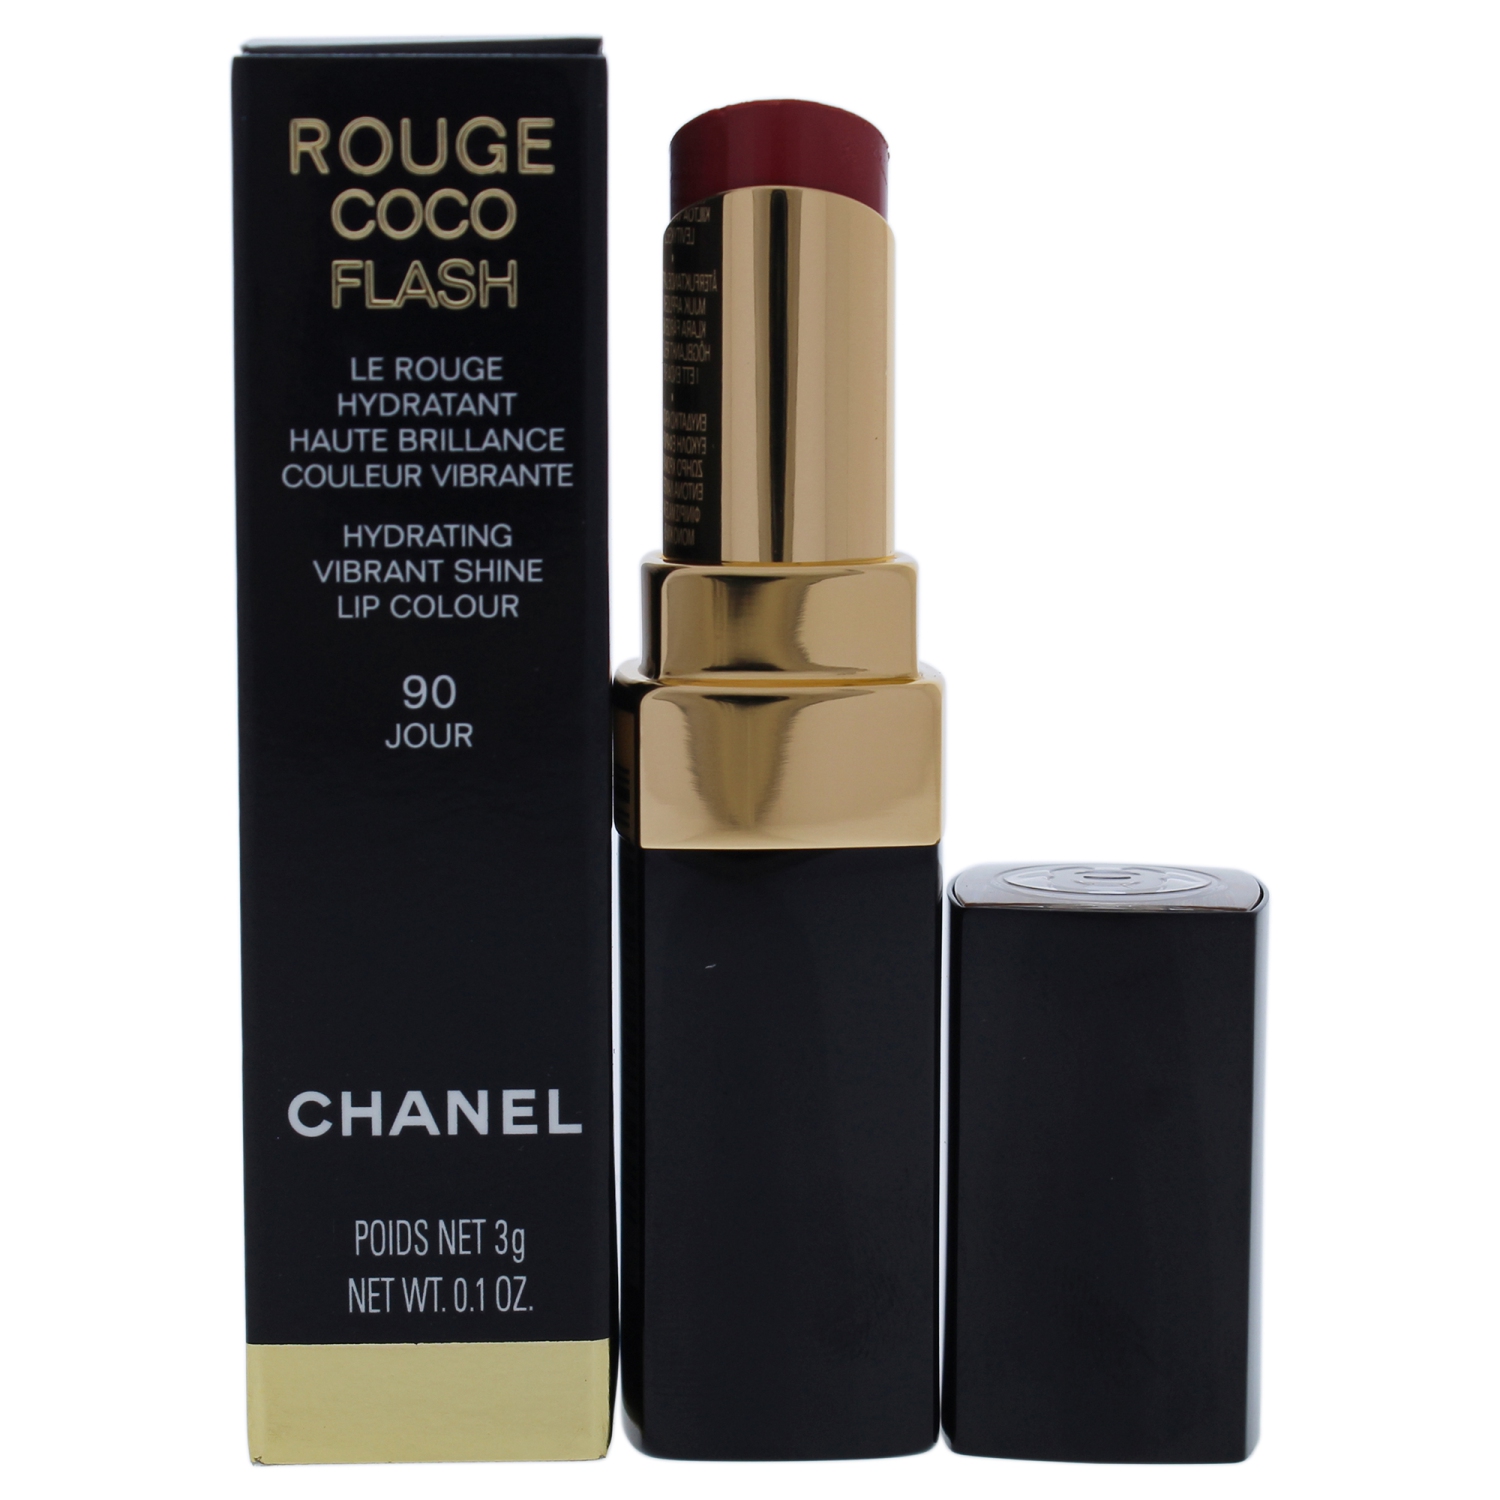 Rouge Coco Flash Lipstick - 90 Jour by Chanel for Women - 0.10 oz Lipstick